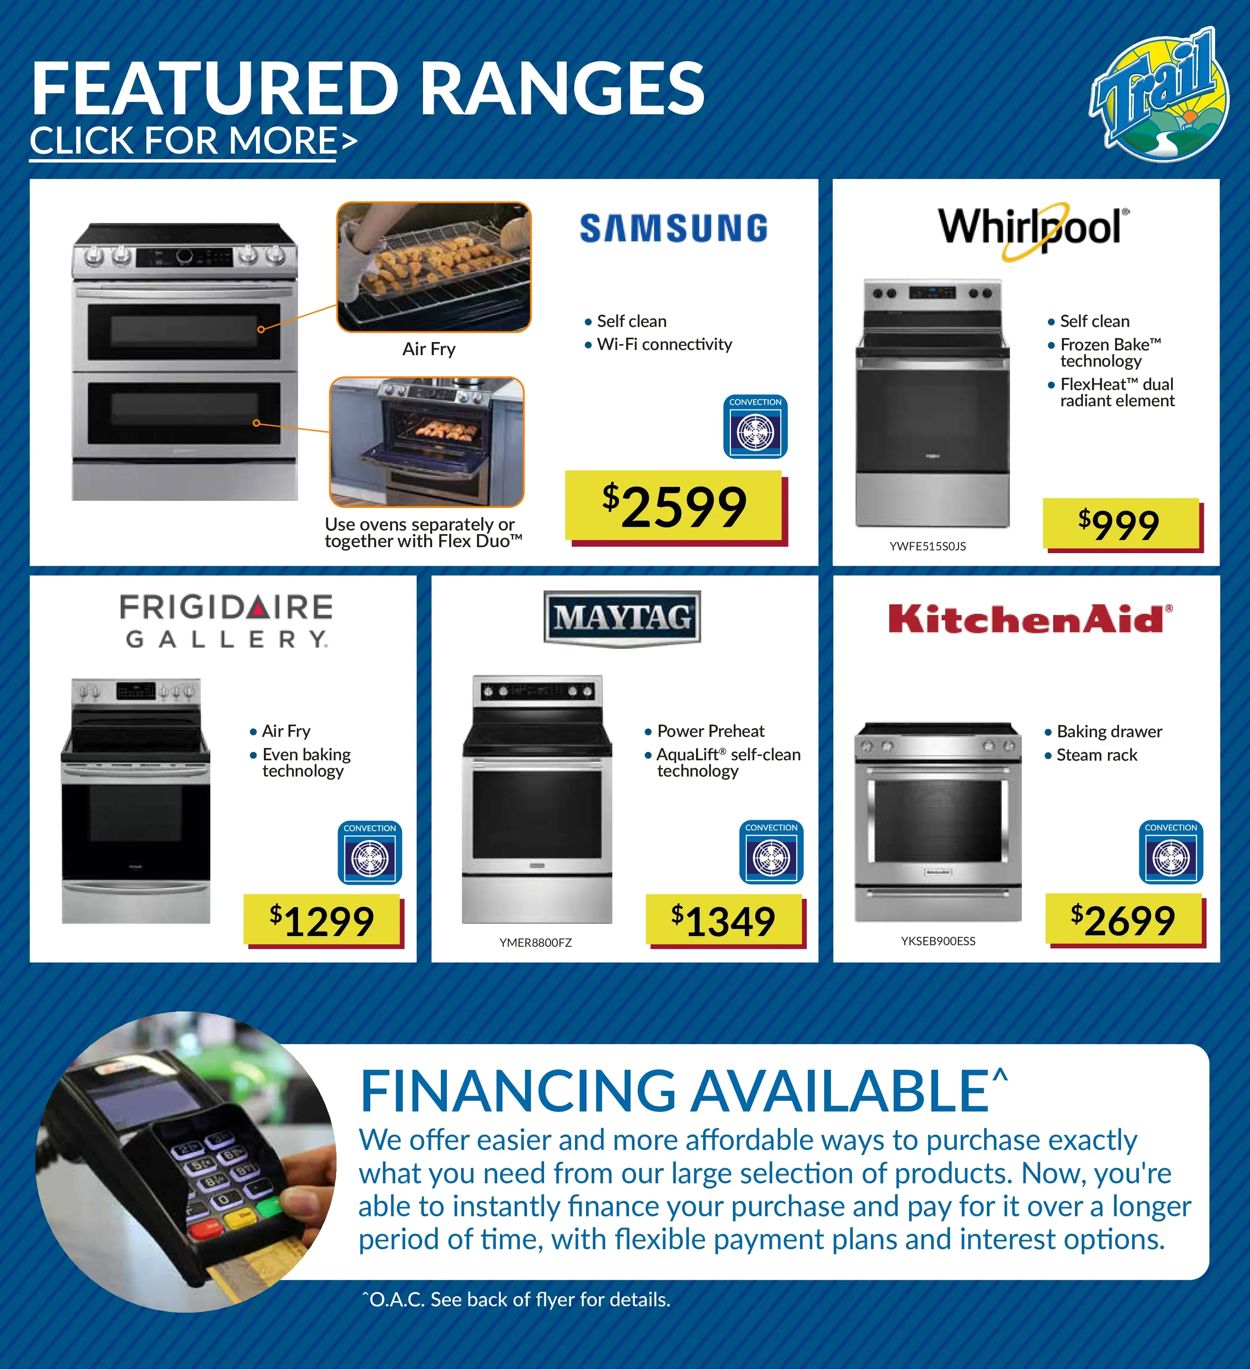 Trail Appliances Flyer from 04/14/2022